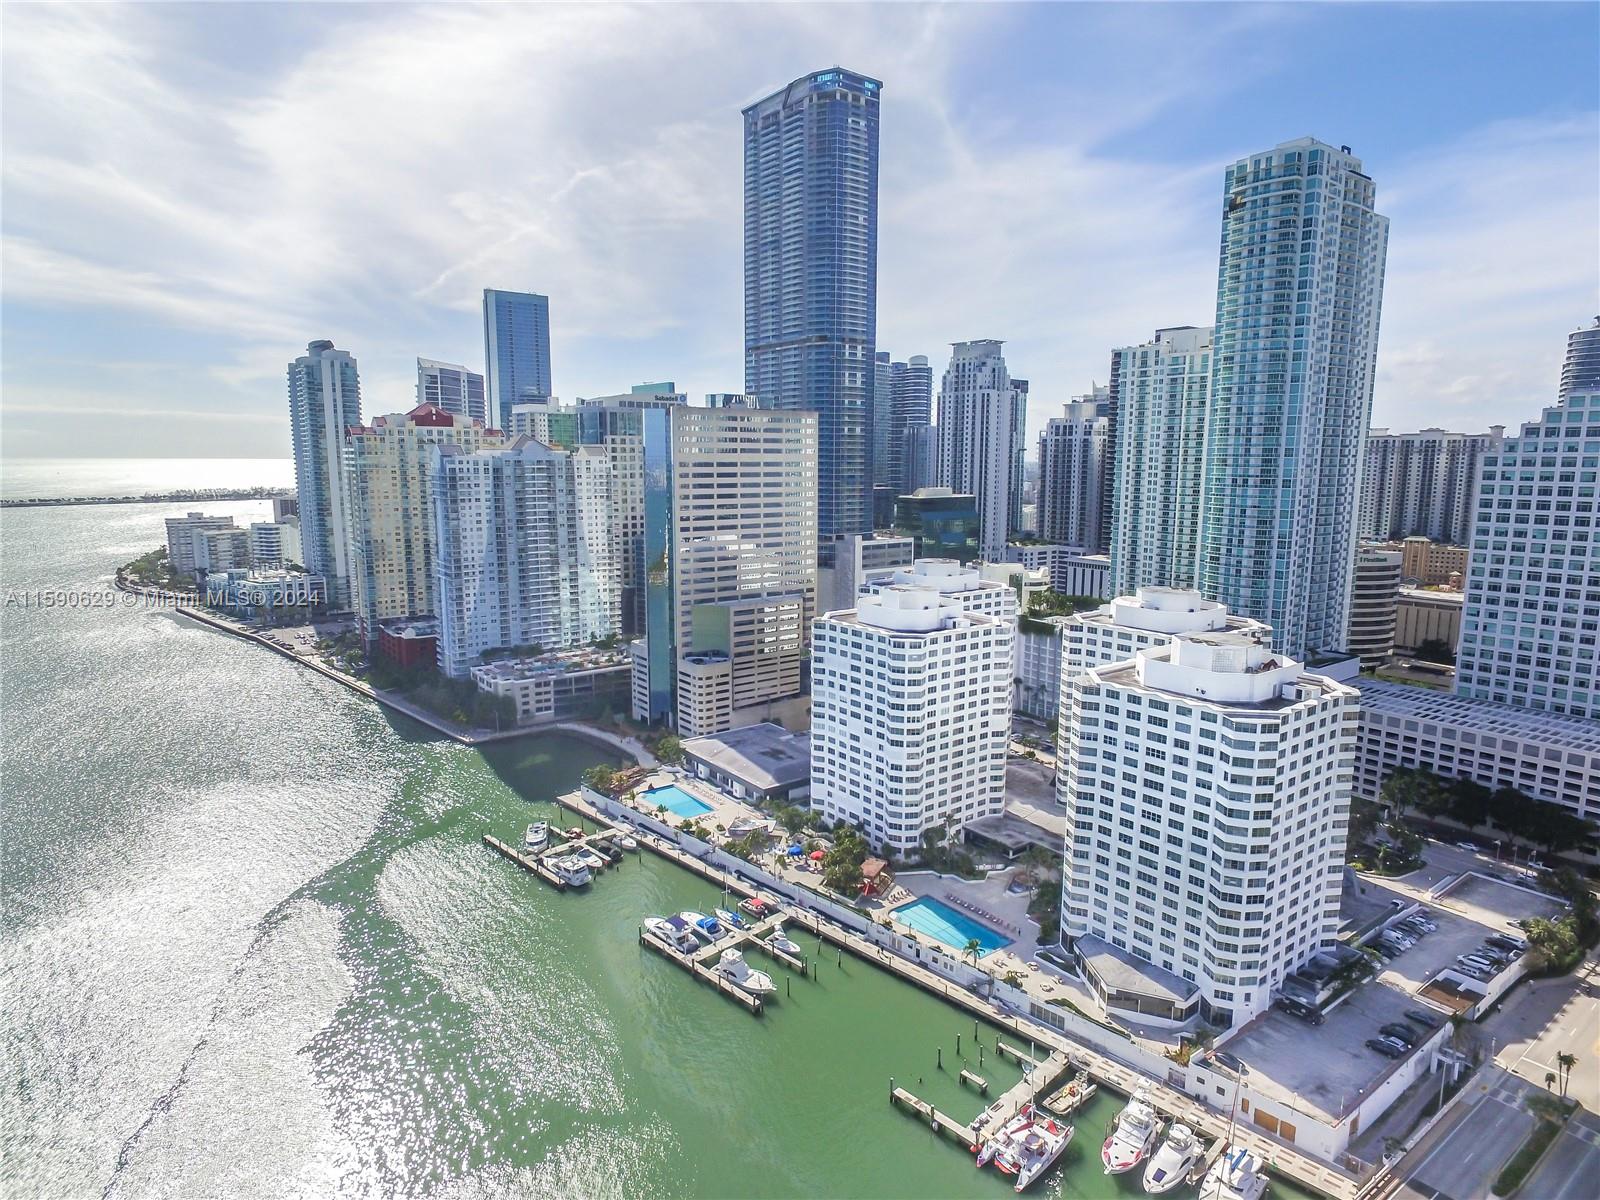 UNDER ONE MILLION DOLLARS, WATERFRONT, 3 BEDROOM 3 BATH UNIT WITH 2010 SQ. FT. , LOCATED ON THE WATER IN THE FABULOUS BRICKELL NEIGHBORHOOD!!! SELLER WILL ACCEPT CRYPTO AS PAYMENT. Four Ambassadors located in the best location of Miami, and at a fantastic price!! Located at ‘Ground Zero’, right in the heart of Miami on World Famous Brickell Avenue, just minutes to downtown, Coconut Grove, Coral Gables, Miami Beach & the airport. Our building enjoys several fine restaurants including Delilah, Da Tang Zhen Wei Gourmet Chinese, fantastic coffee shop/ grocery, marina, beauty salon, and much more. Join us and enjoy for yourself the finest restaurants in Miami just steps from our door as well as 2 Luxury shopping malls, Whole Foods & 3 Publix markets to choose from, all within walking distance!